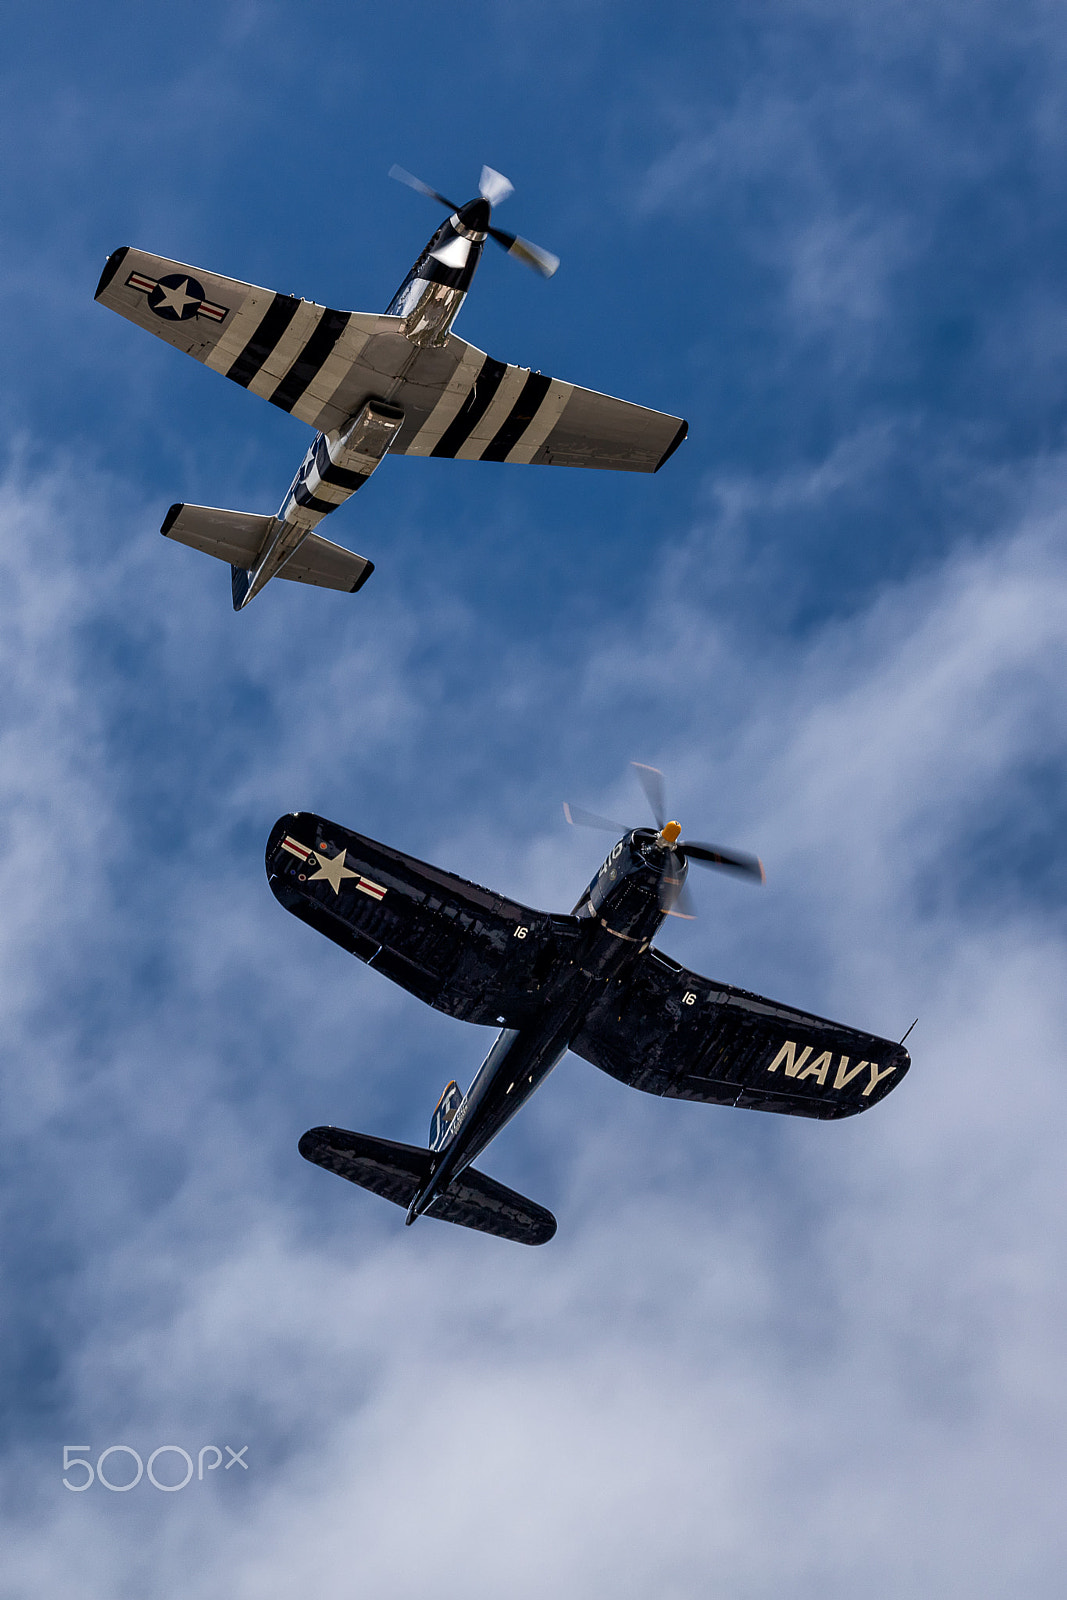 Canon EOS 5DS + 150-600mm F5-6.3 DG OS HSM | Sports 014 sample photo. F-4u corsair and p-51 mustang in flight 7 photography